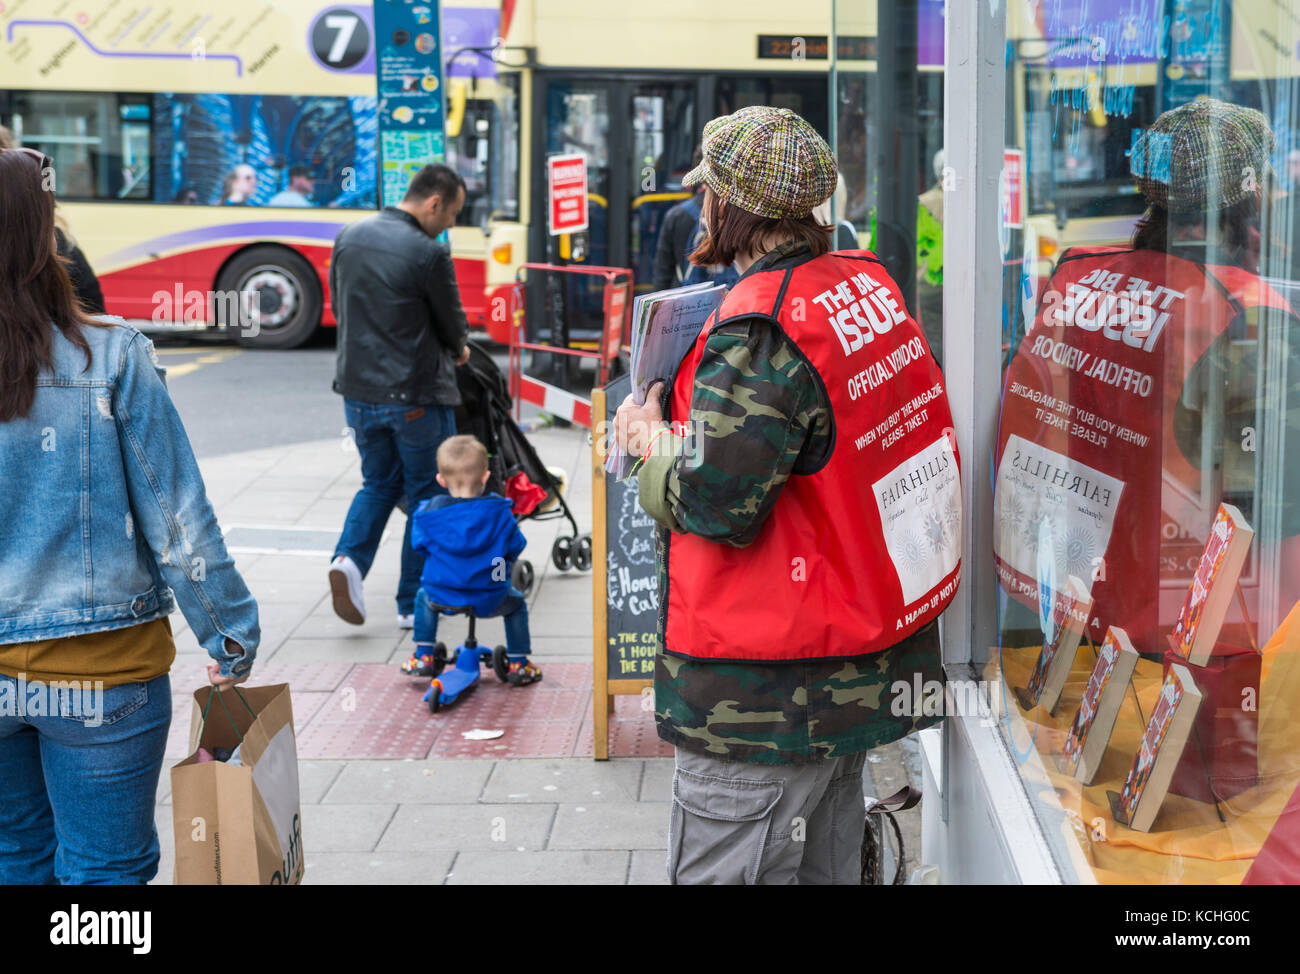 Woman on the streets as an official vendor of the Big Issue magazine in Brighton, East Sussex, England, UK. Stock Photo